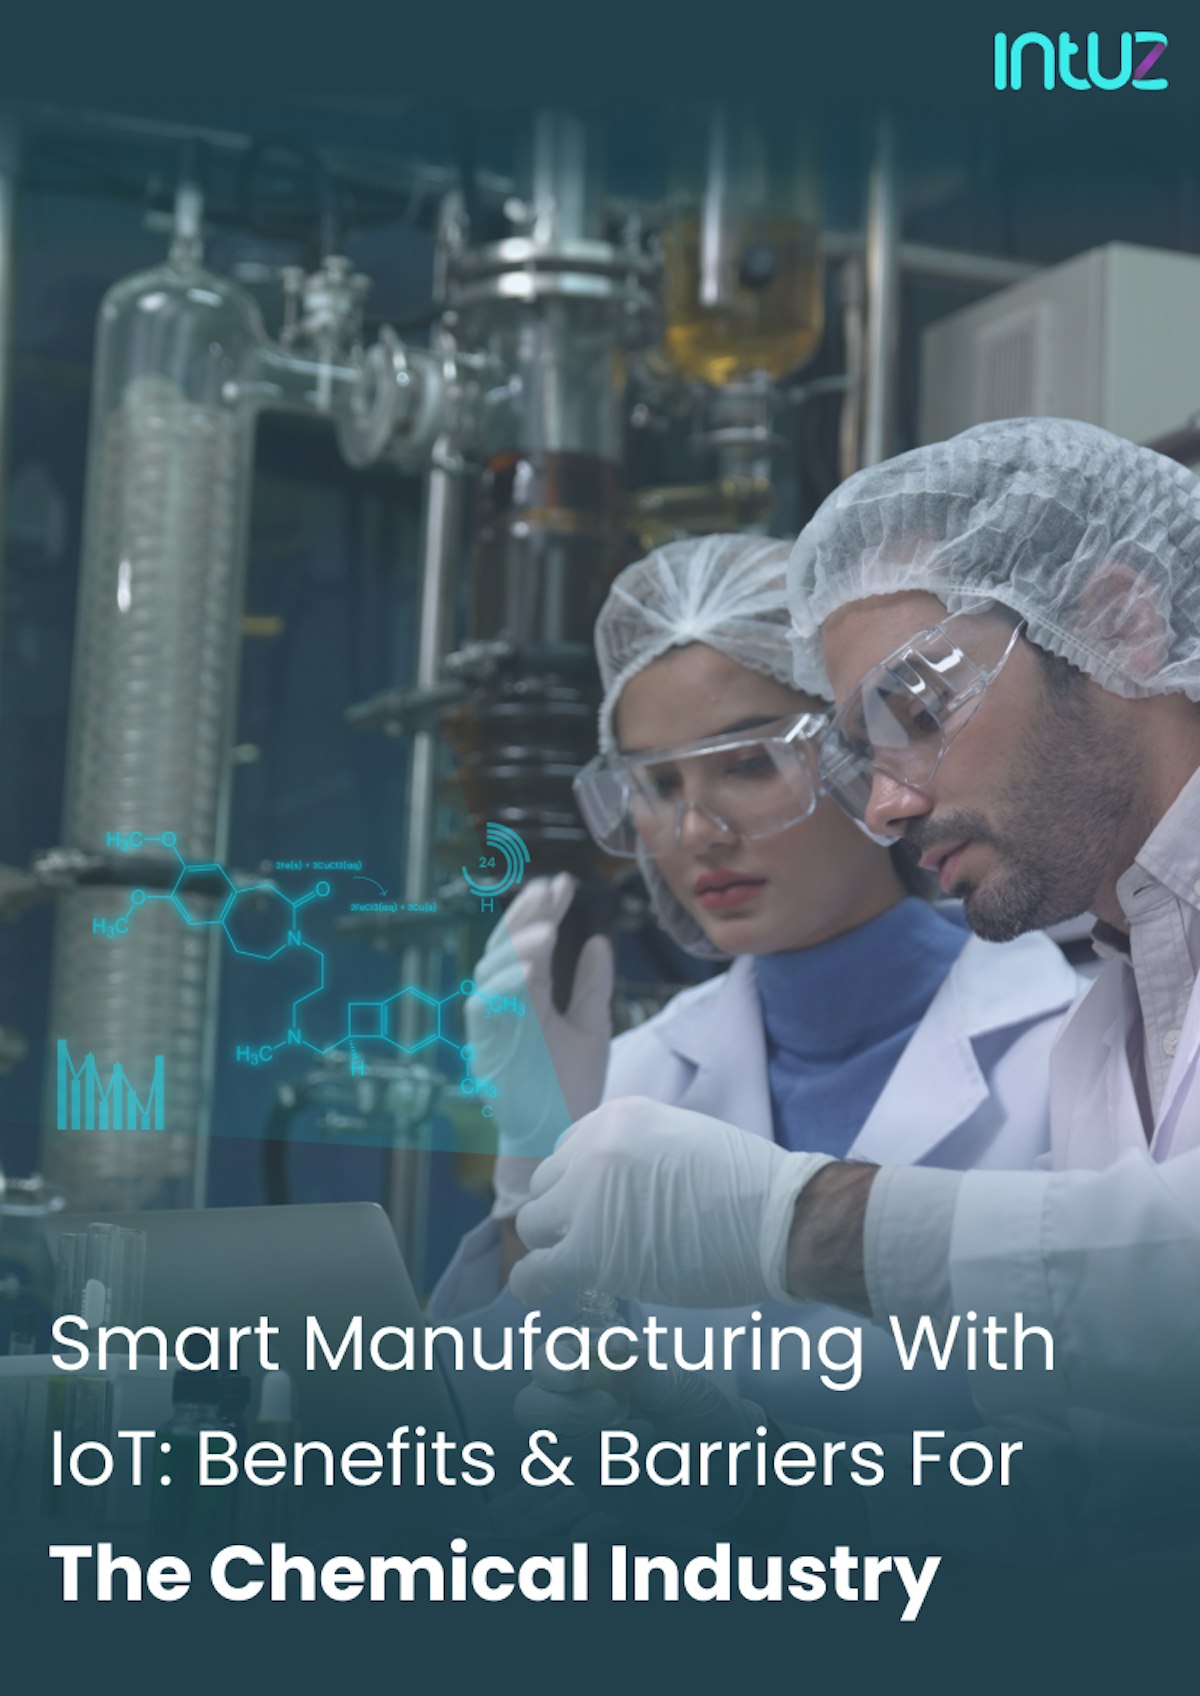 IoT in Chemical Industry - Intuz